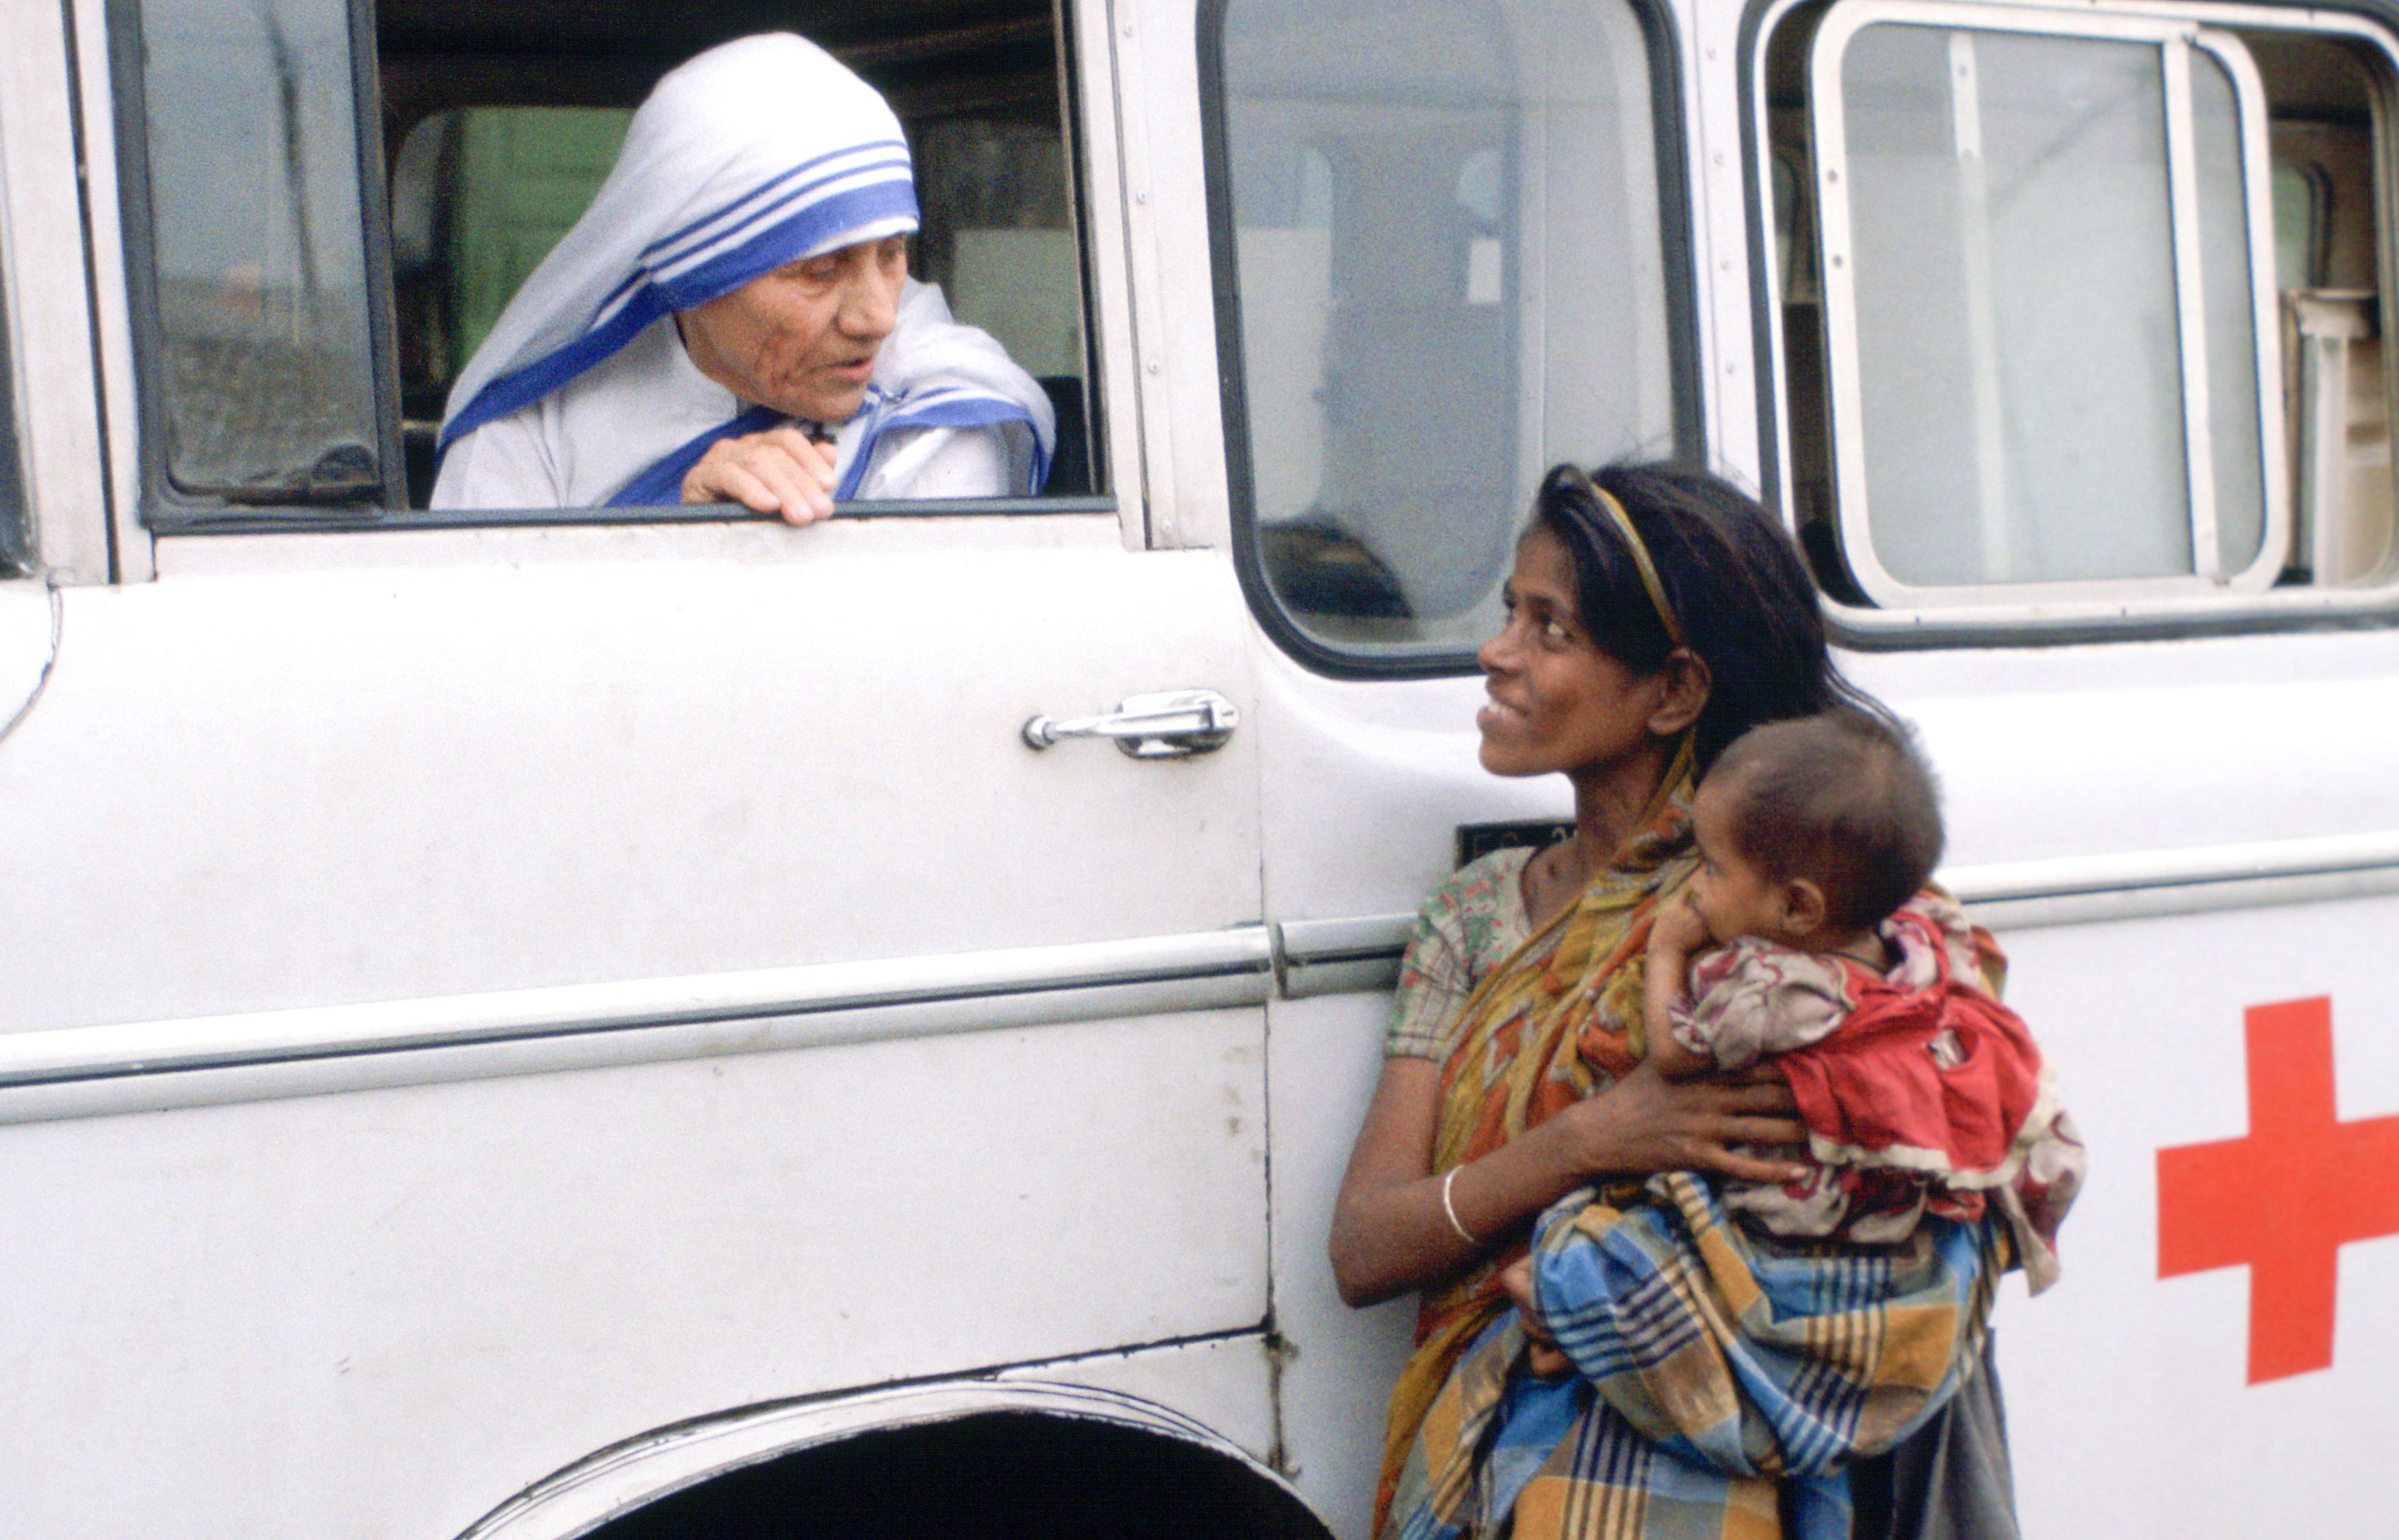 Mother Teresa talking with a poor woman and her child from a Red Cross minibus in Calcutta, India.